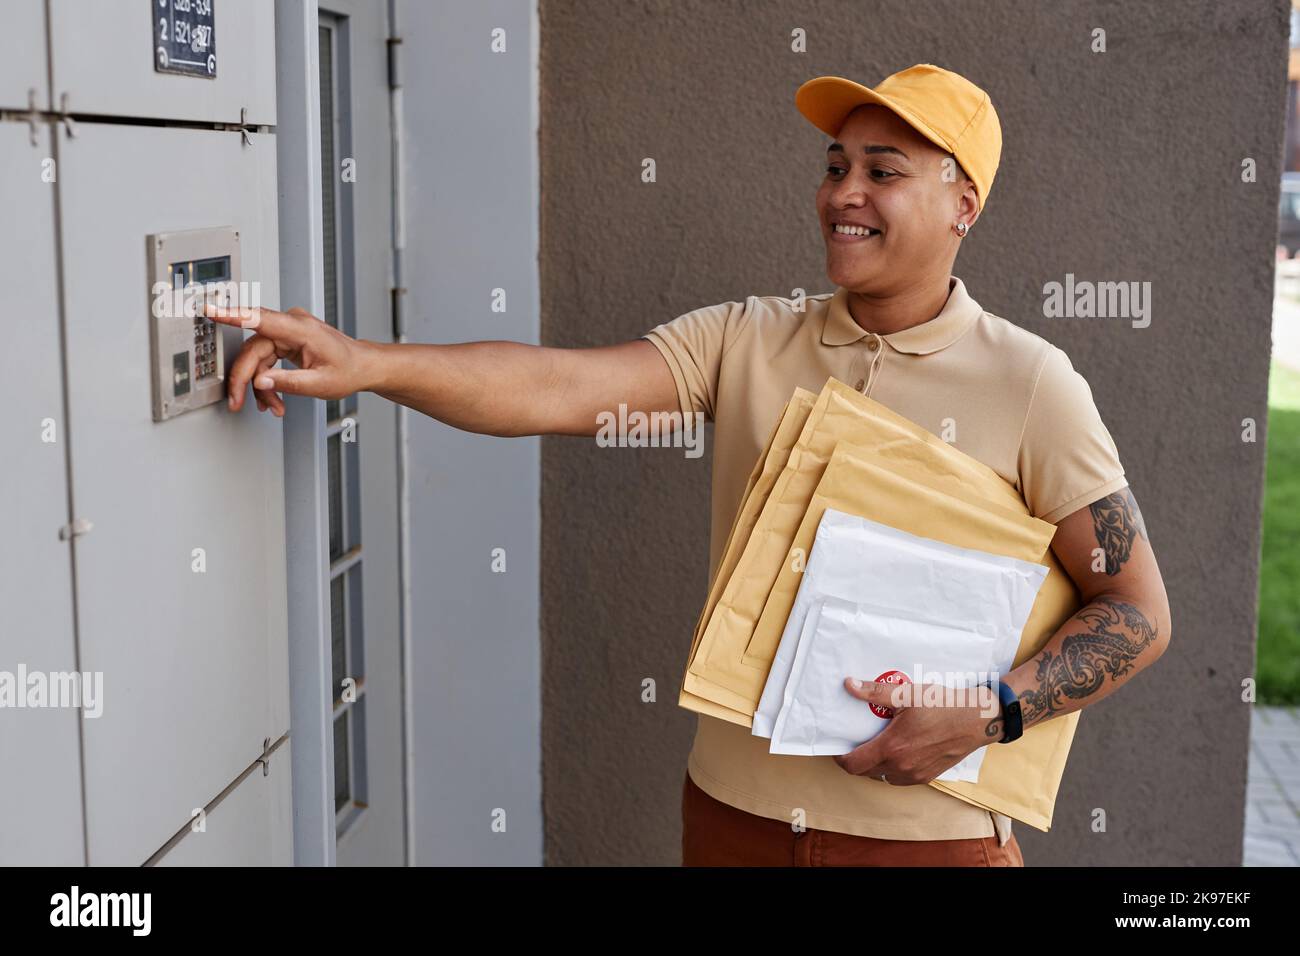 Side view portrait of female delivery worker ringing doorbell and holding packages Stock Photo